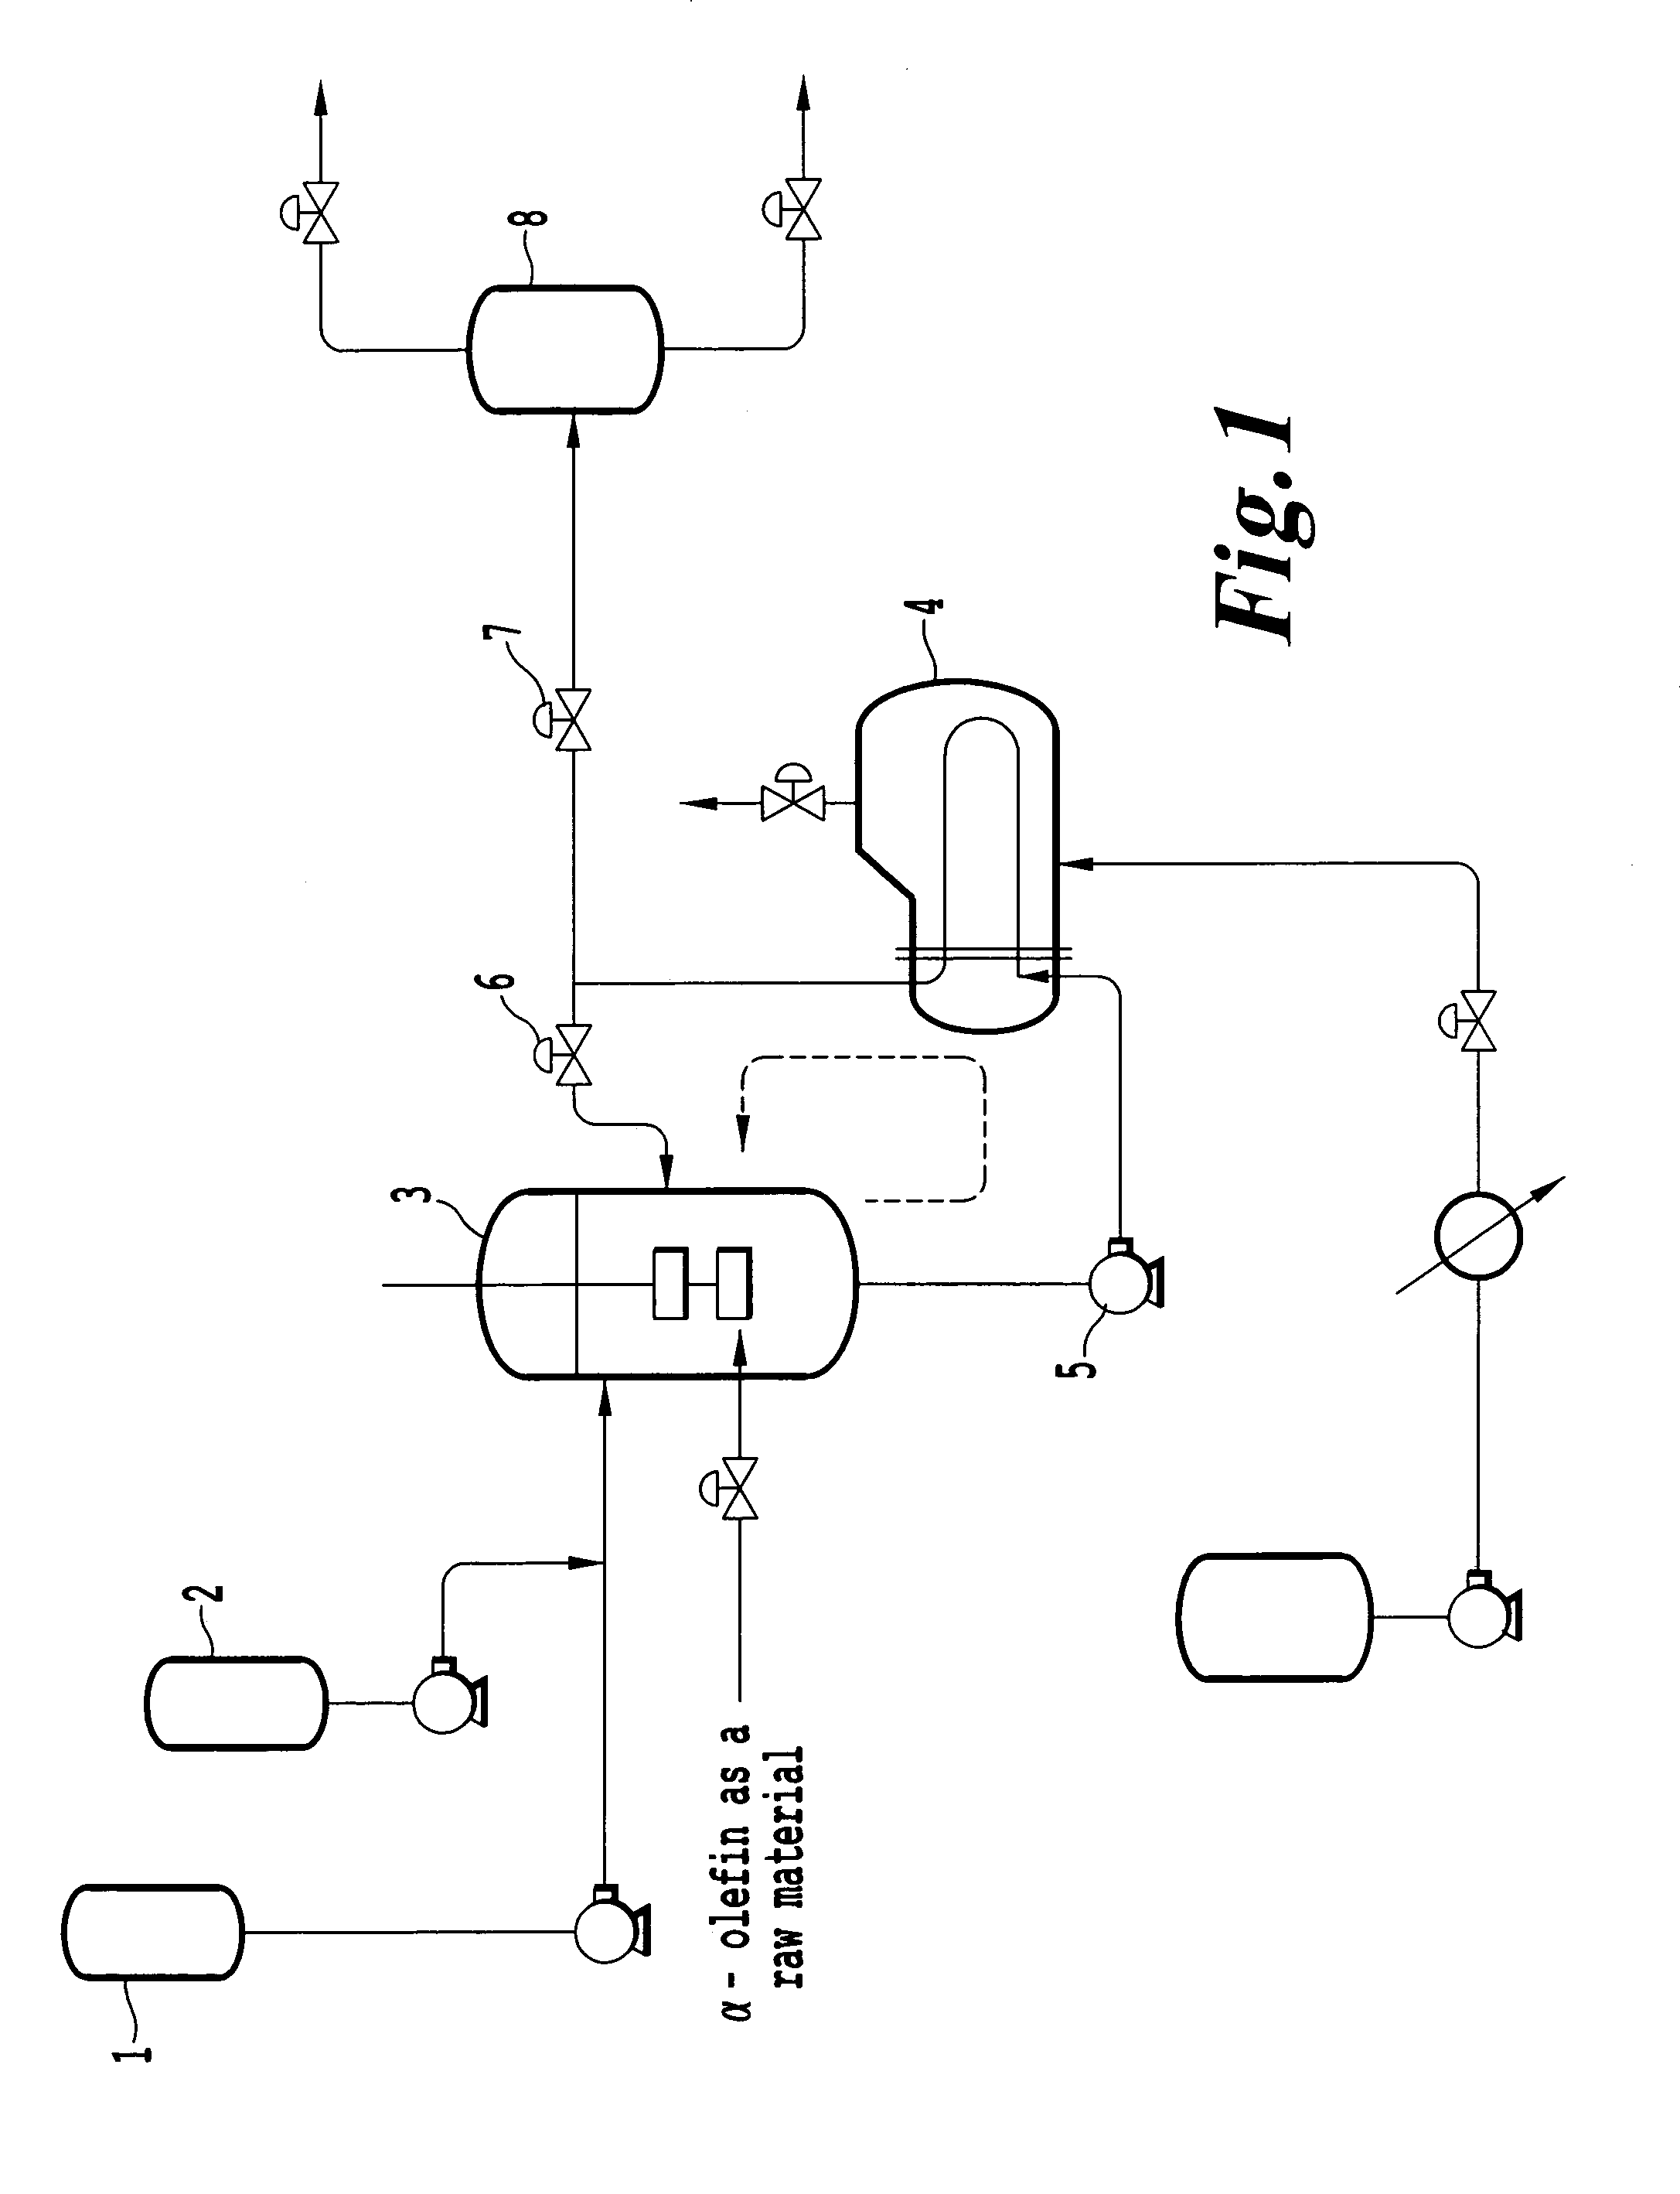 Process for producing low polymer of alpha-olefin